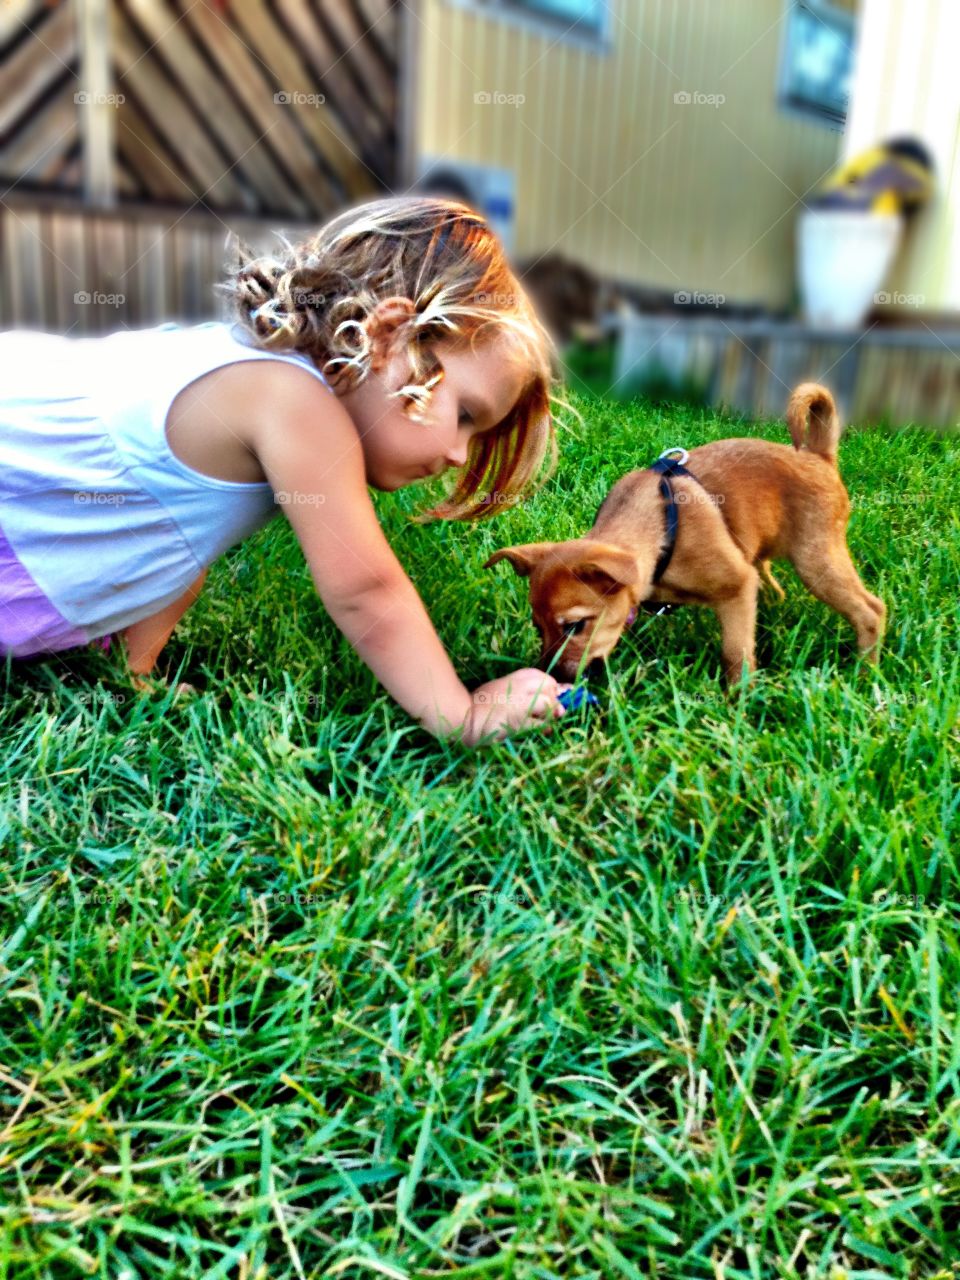 The girl and the puppy! 